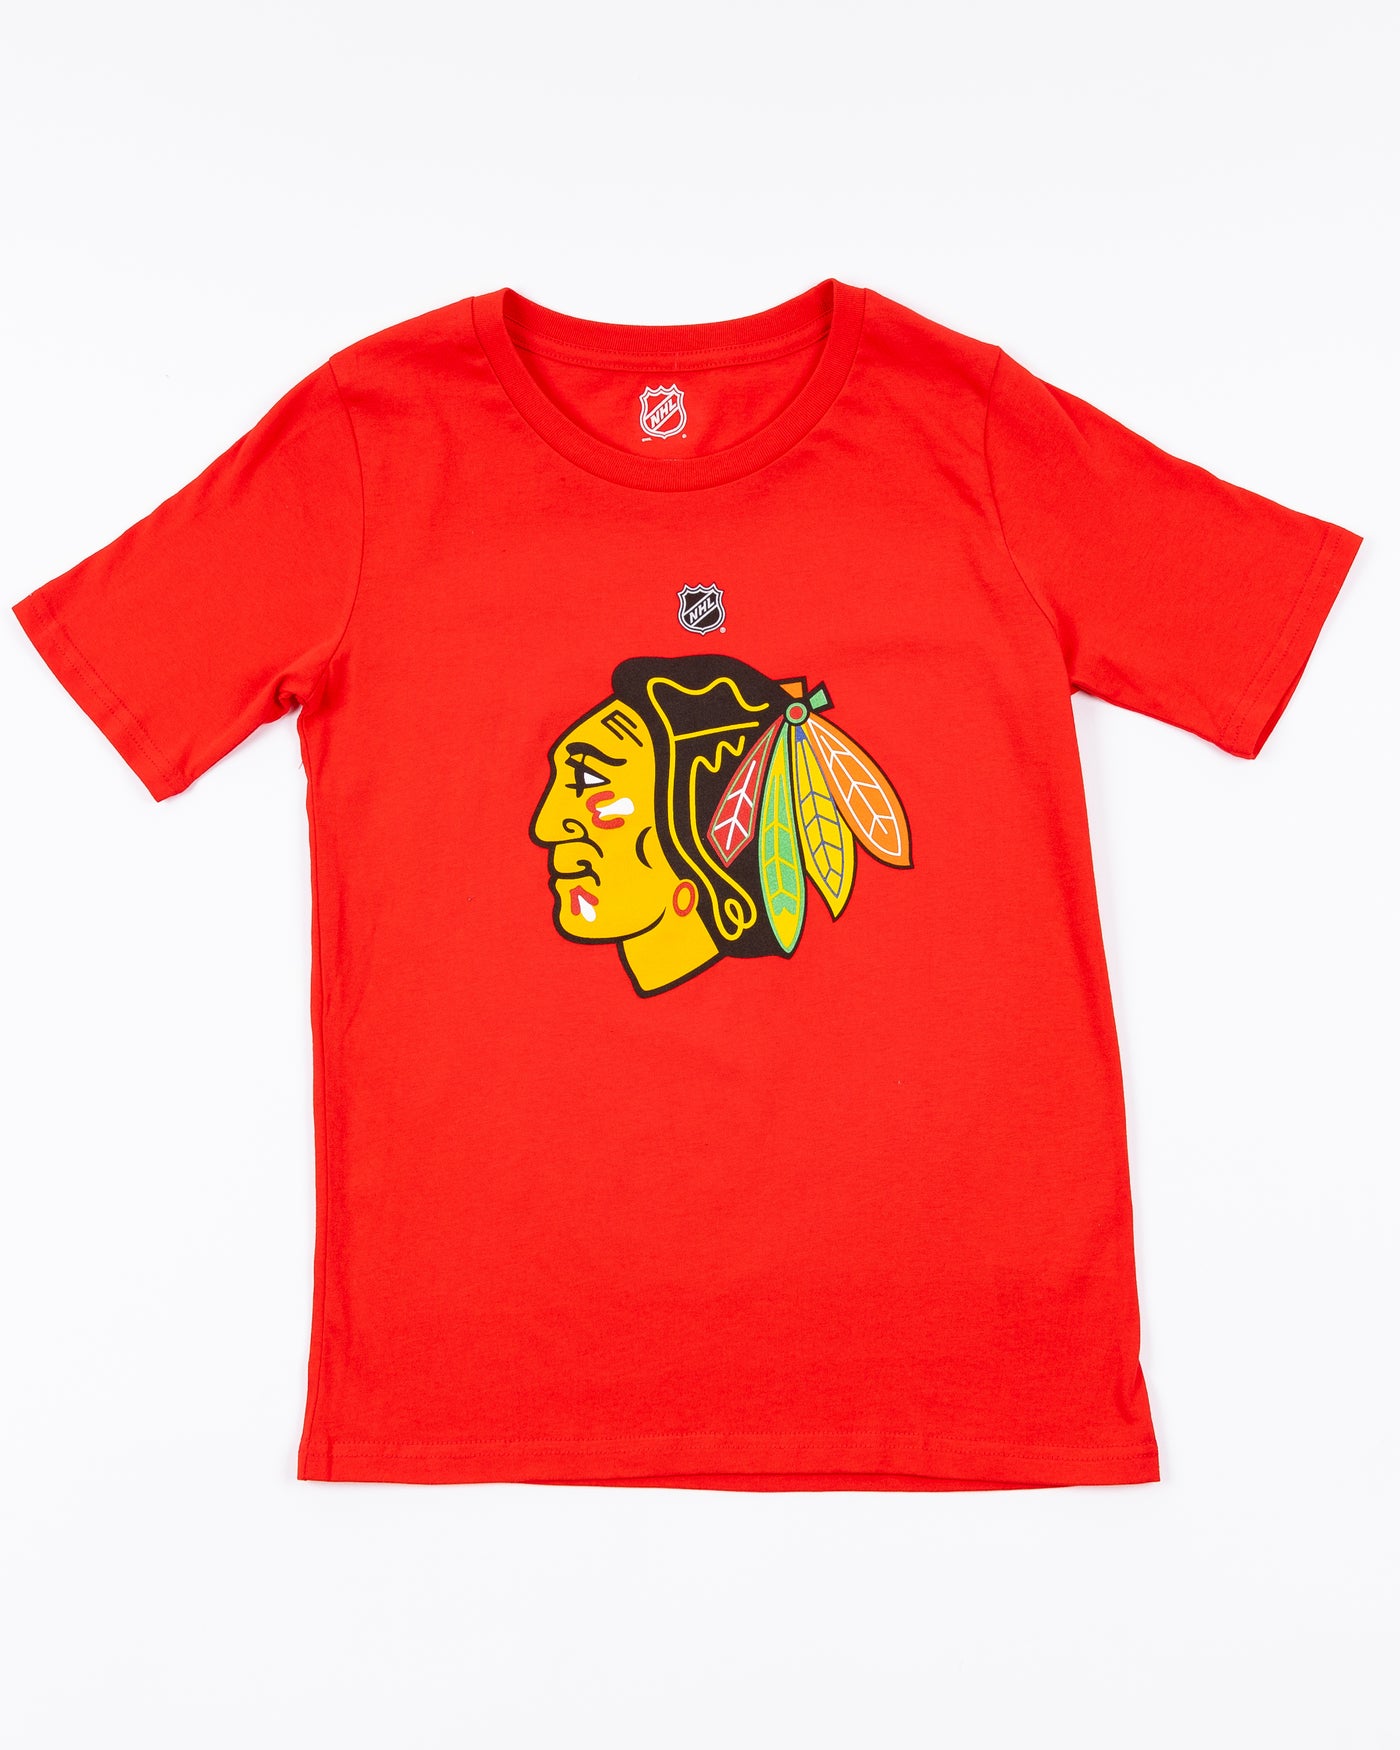 red Chicago Blackhawks short sleeve youth tee with primary logo across front - front lay flat